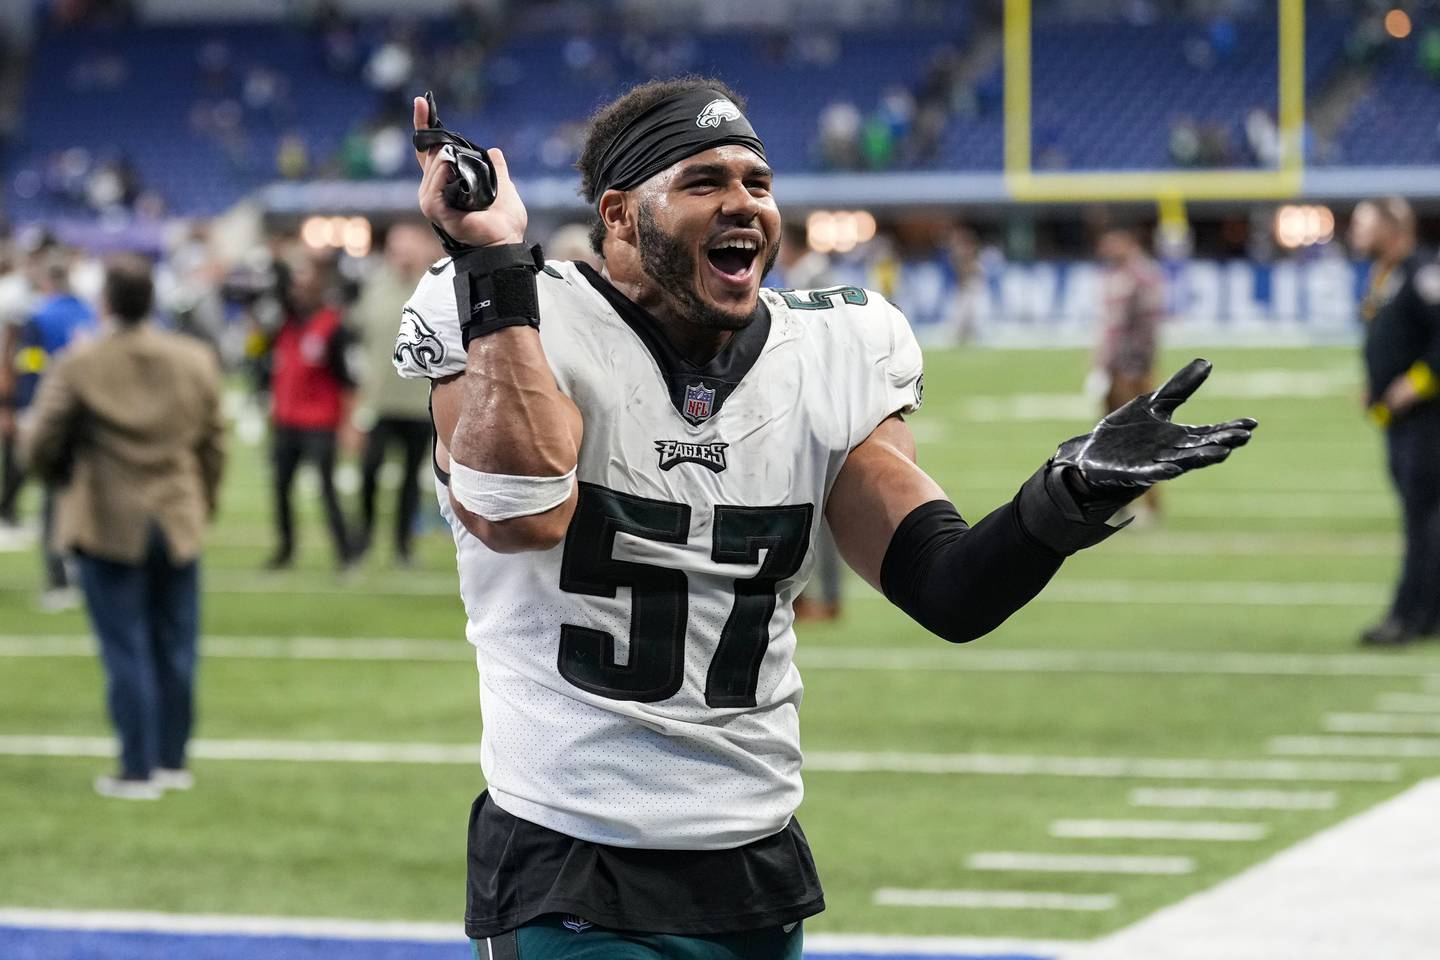 Philadelphia Eagles linebacker T.J. Edwards celebrates as he leaves the field following a game against the Indianapolis Colts in Indianapolis, Fla., Sunday, Nov. 20, 2022.